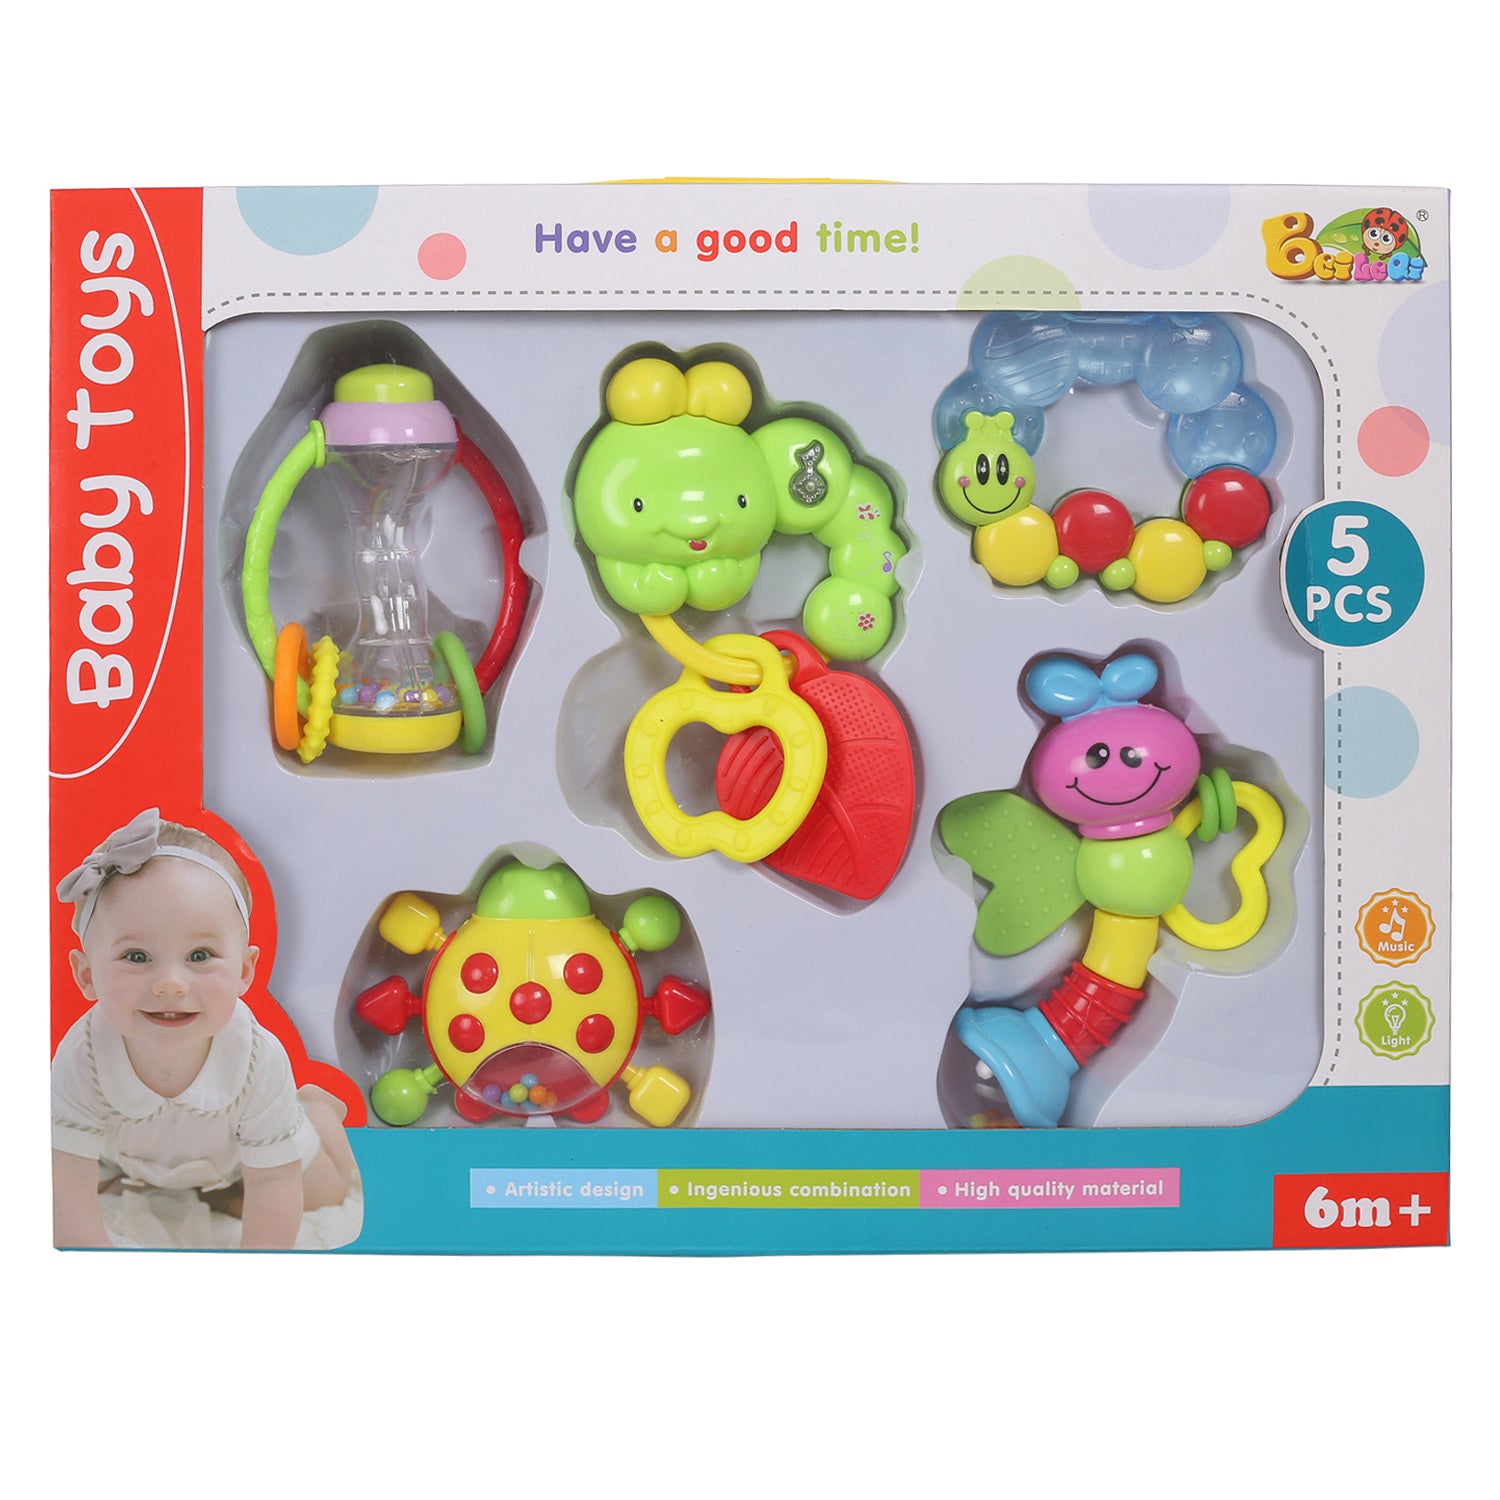 Premium Multicolour Set of 5 Musical Rattle Toys With Light